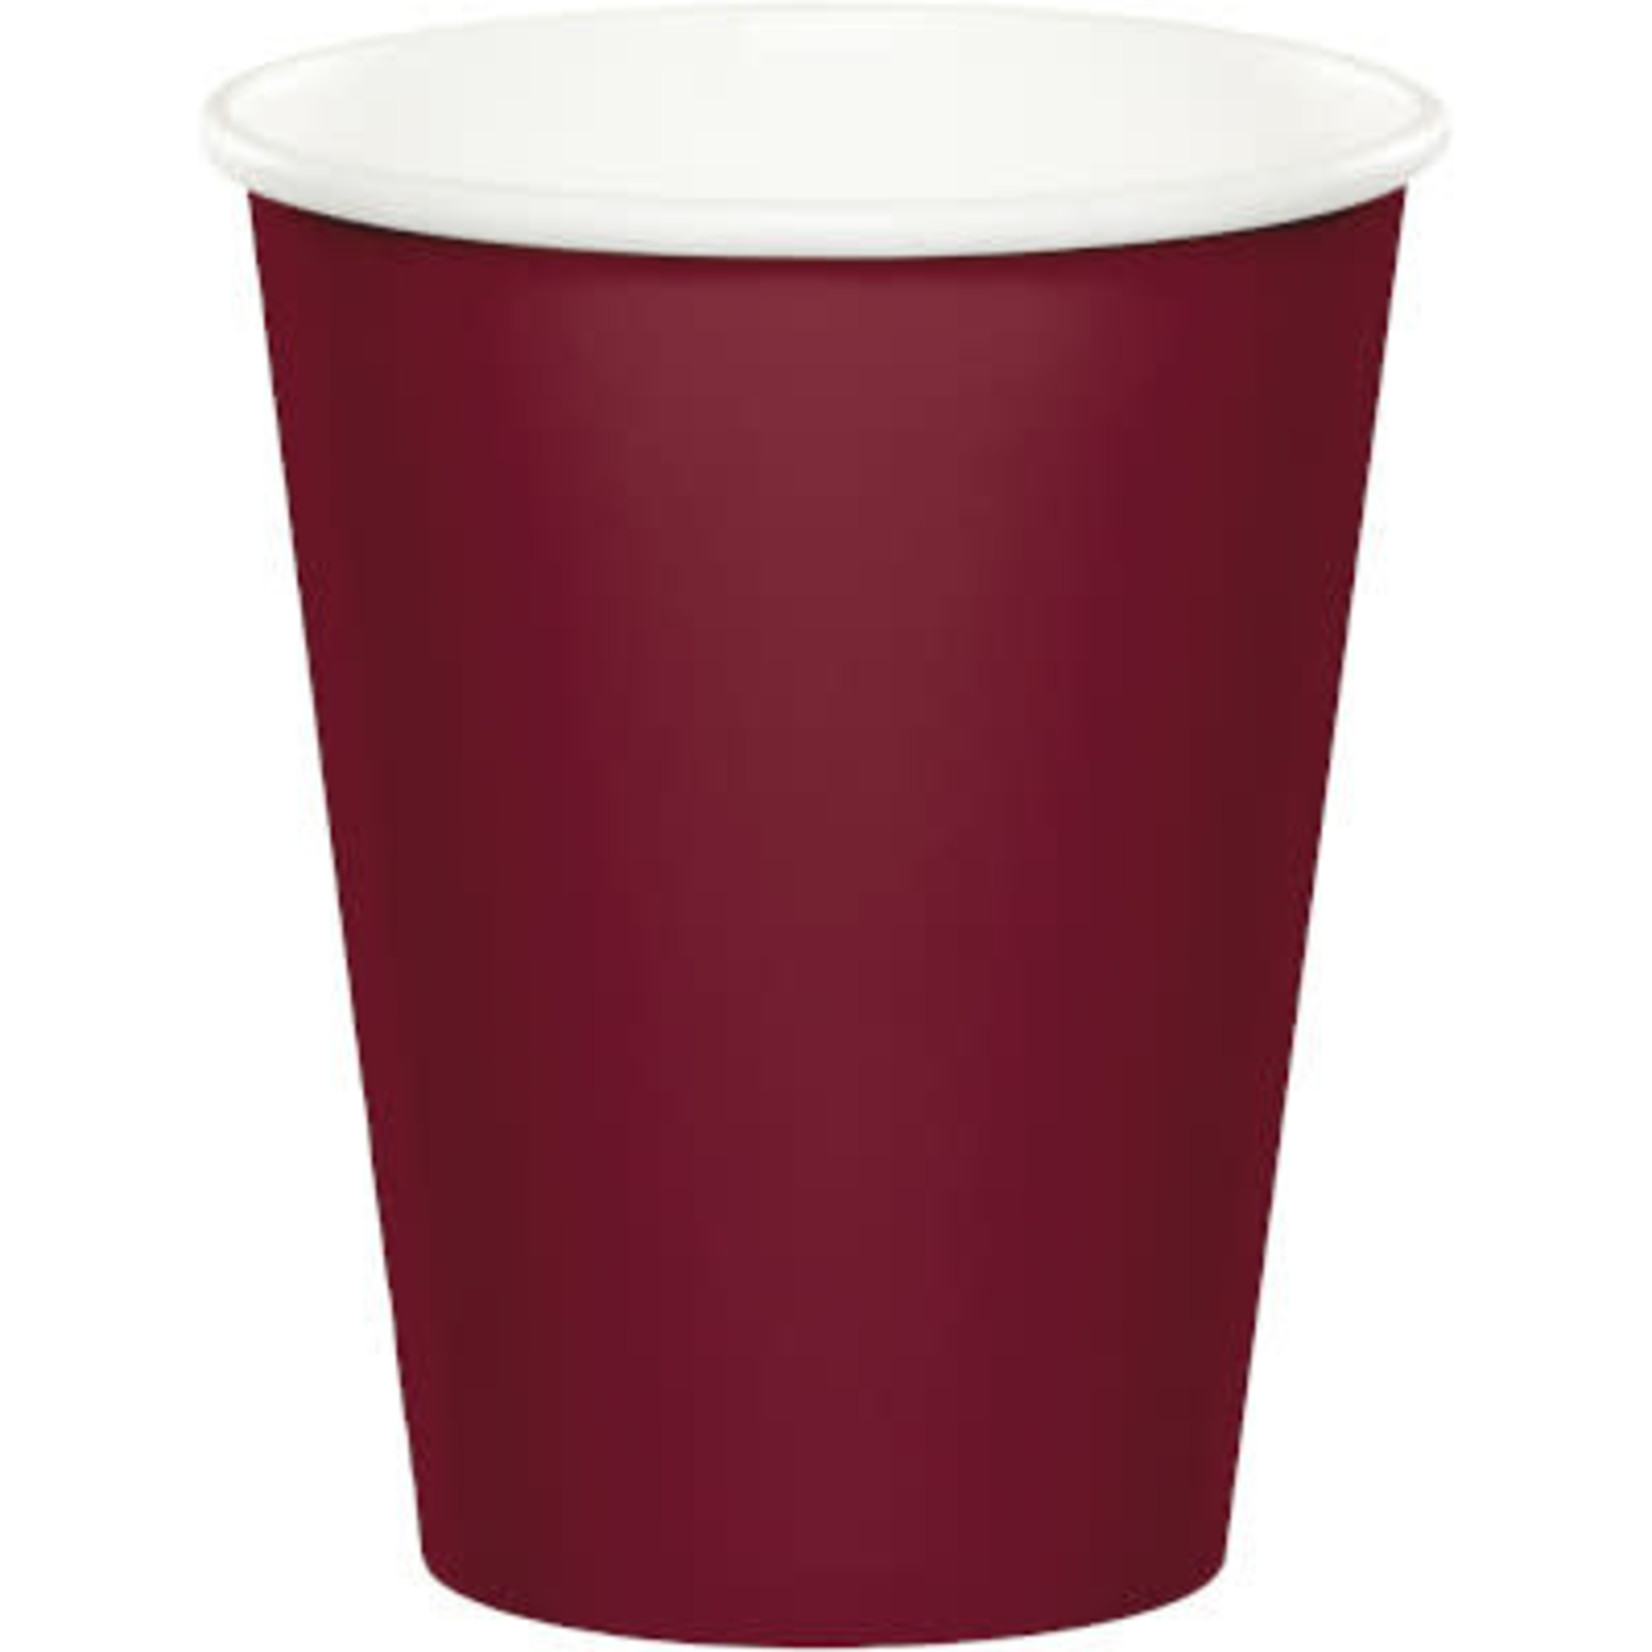 Touch of Color 9oz. Burgundy Hot/Cold Paper Cups - 24ct.